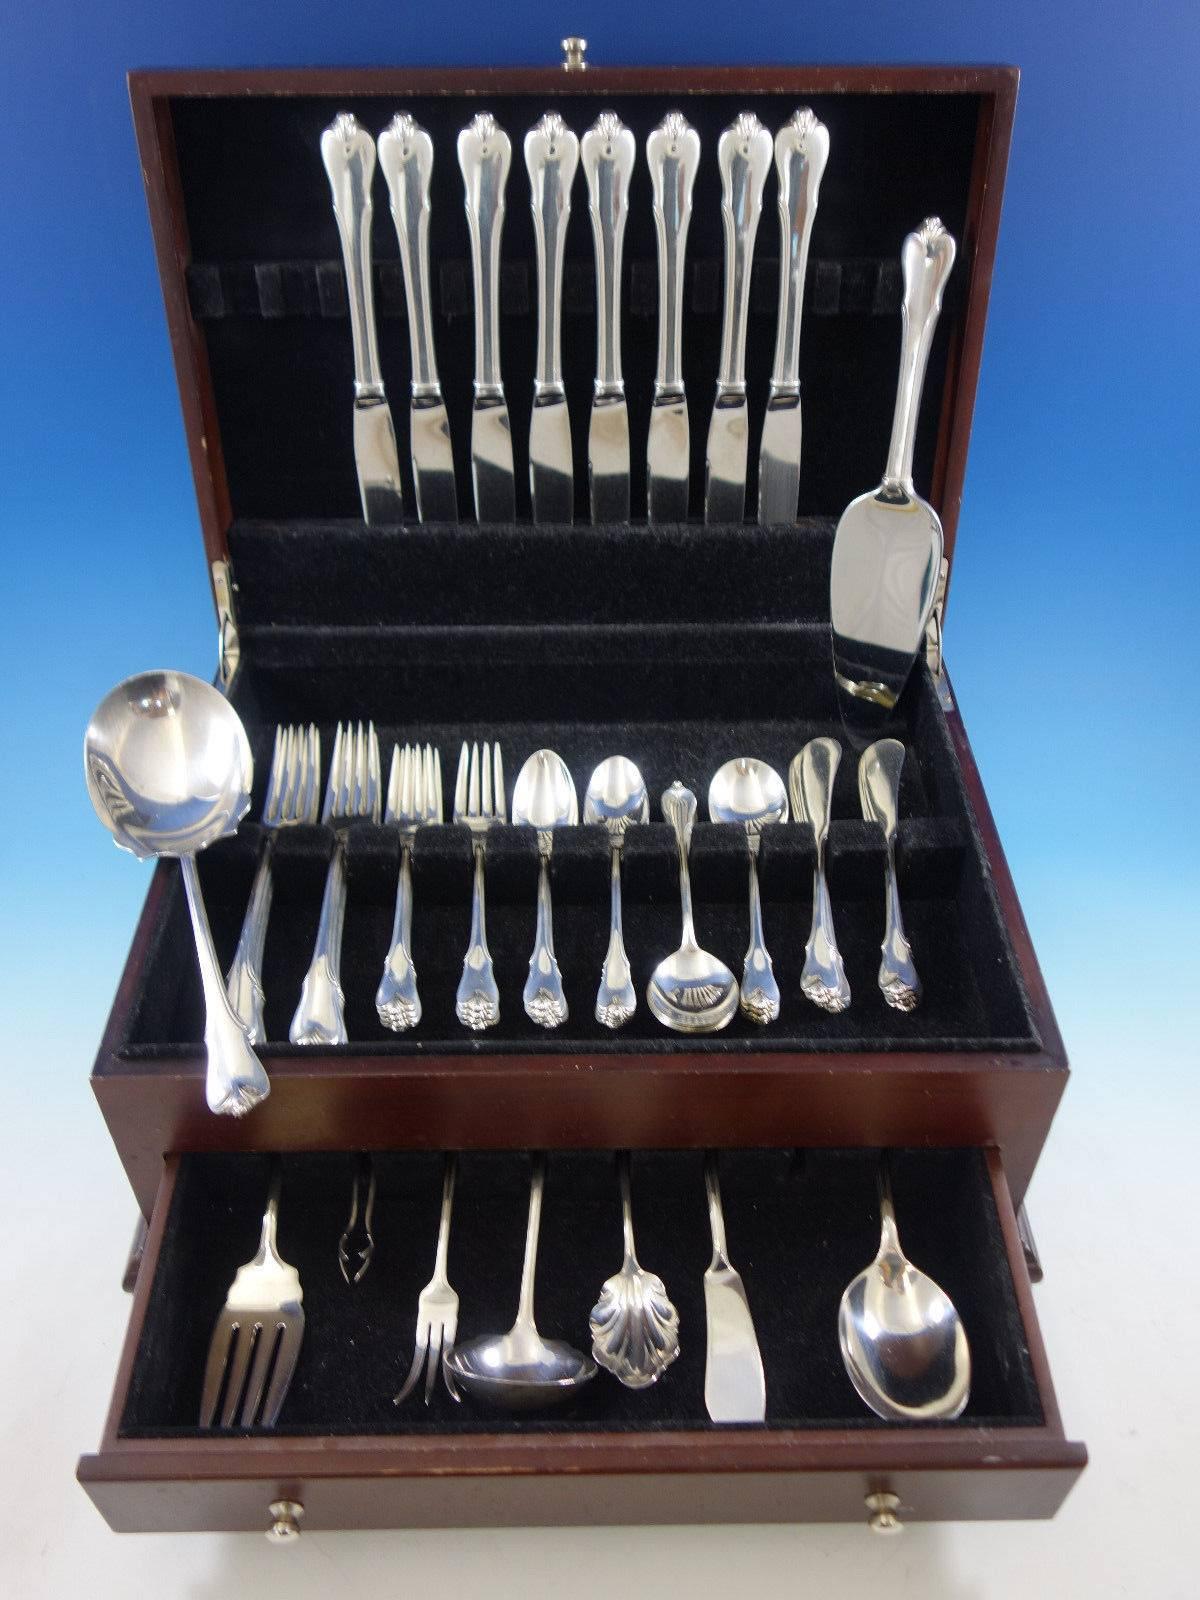 Grand Colonial by Wallace sterling silver flatware set, 57 pieces. This set includes: 

Eight dinner size knives, 9 7/8